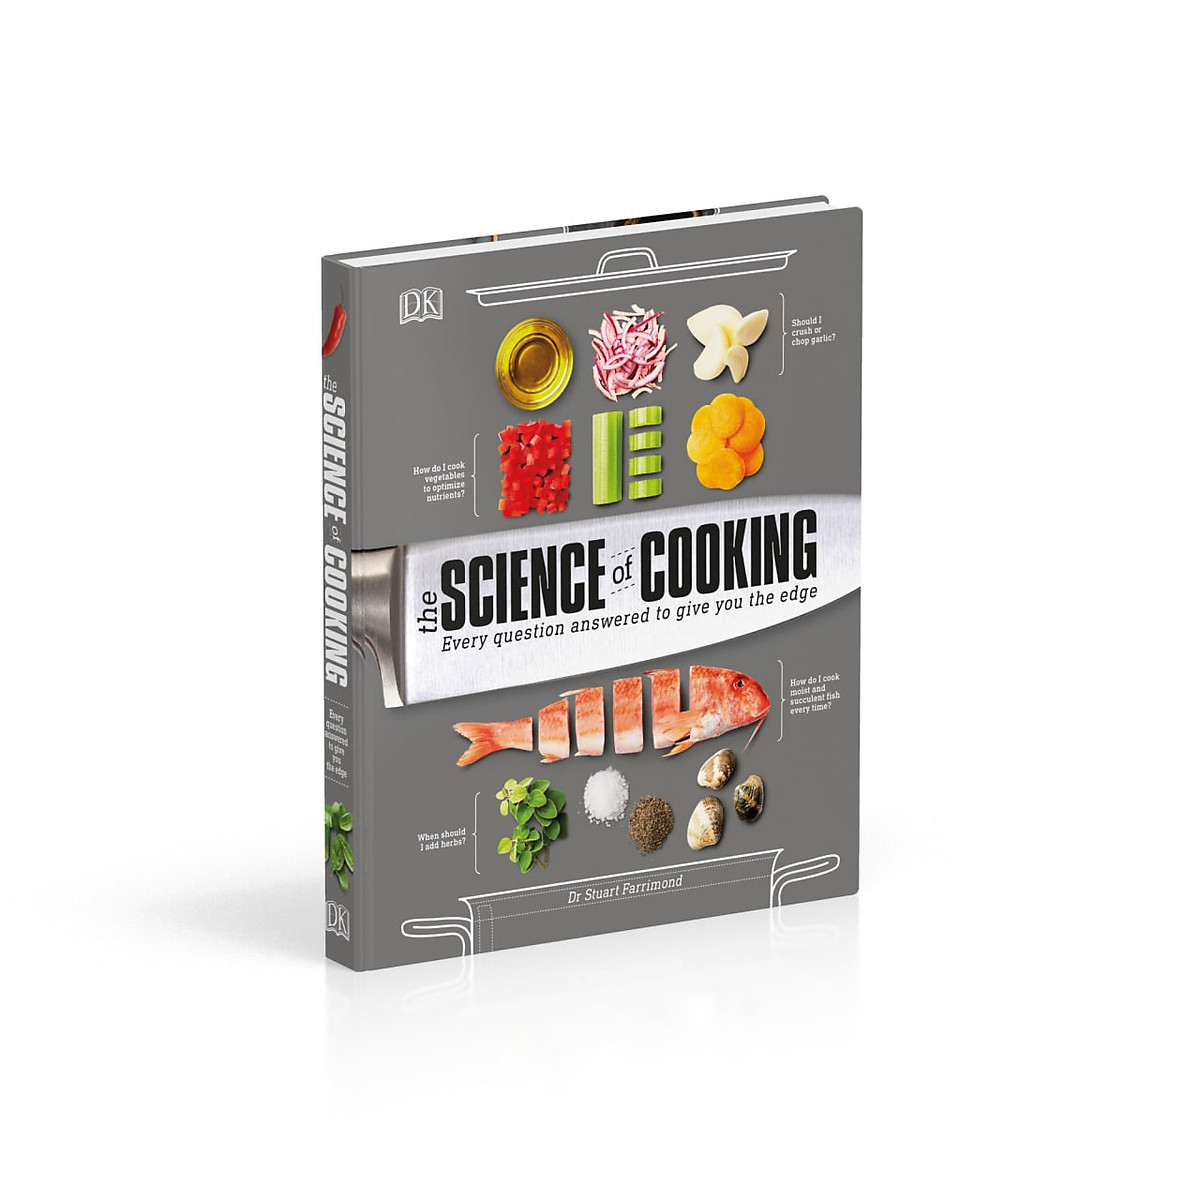 DK books | The Science of Cooking